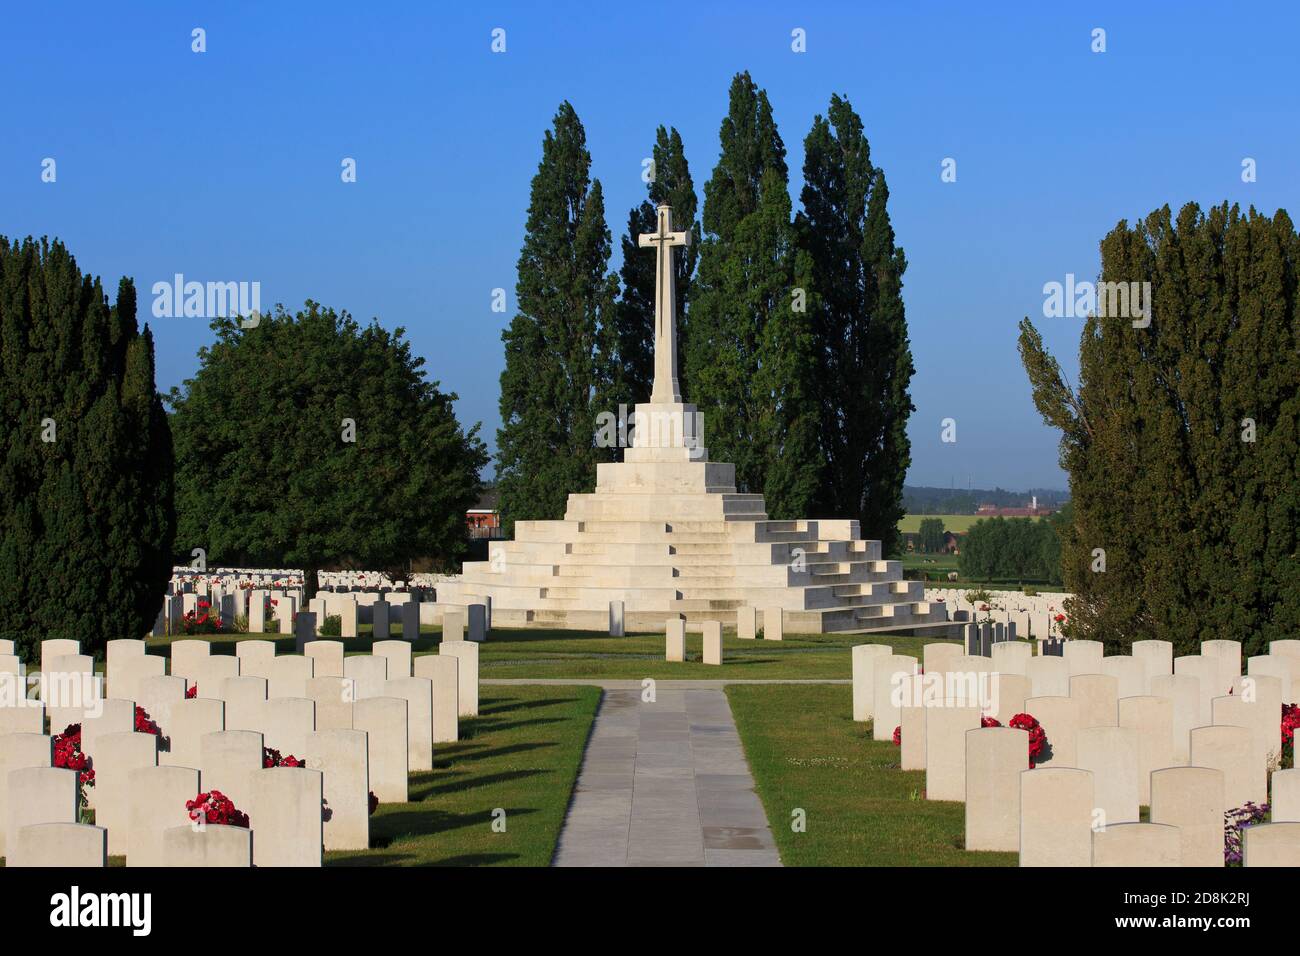 The Cross of Sacrifice built on a German pill box amidst thousands of Commonwealth graves at Tyne Cot Cemetery (1914-1918) in Zonnebeke, Belgium Stock Photo